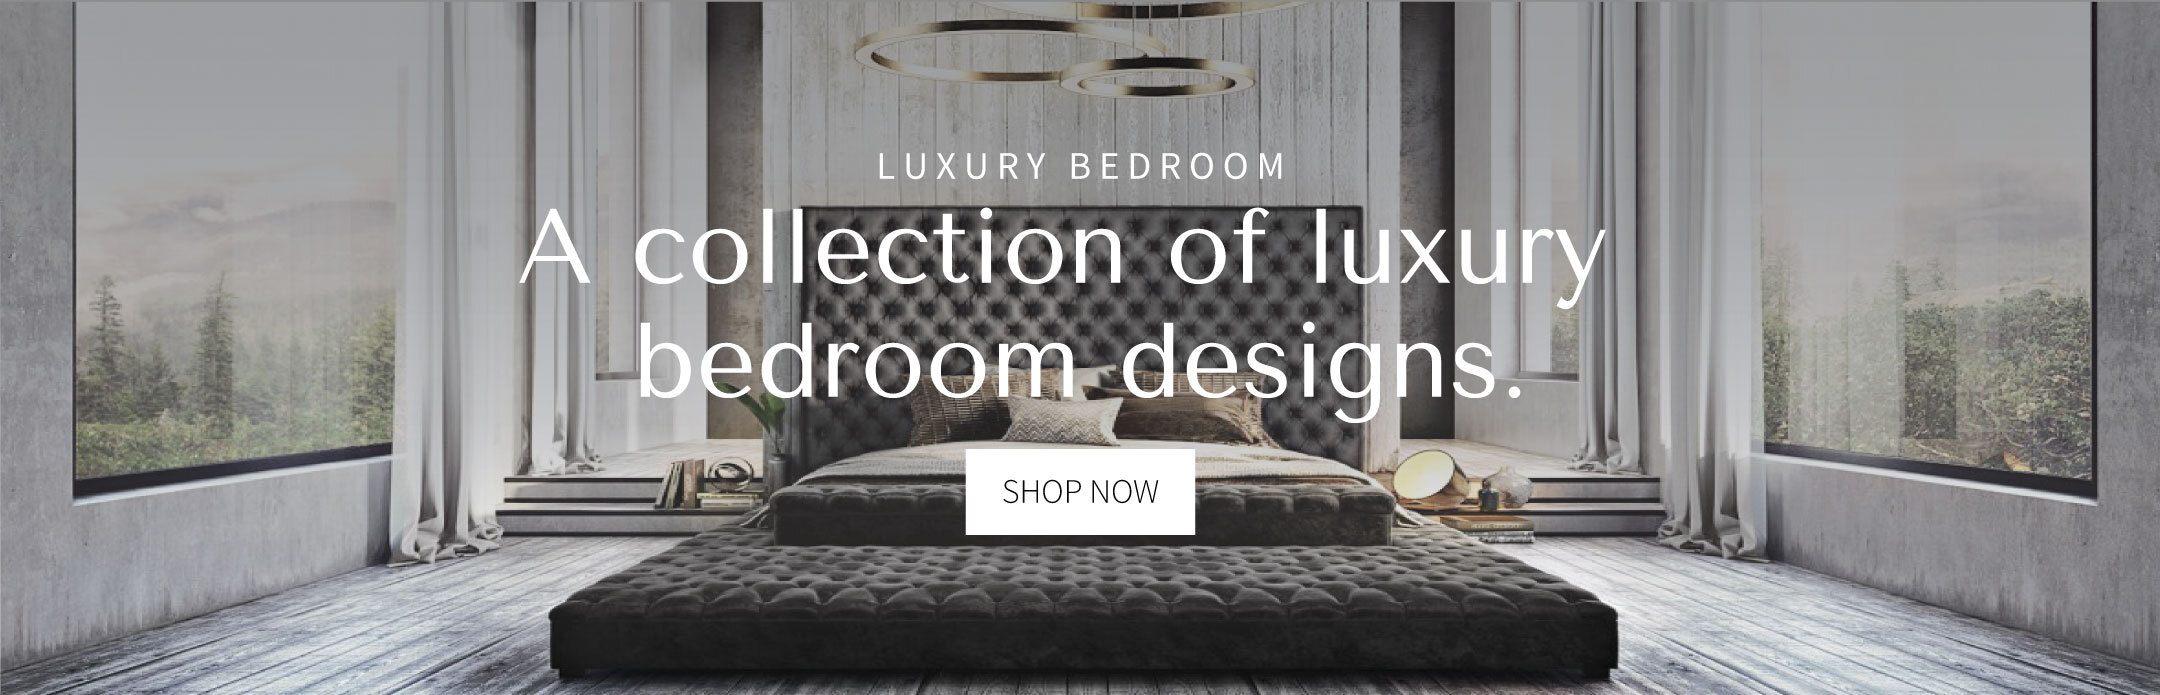 Luxury Bedroom Furniture | Unlimited Furniture in New York